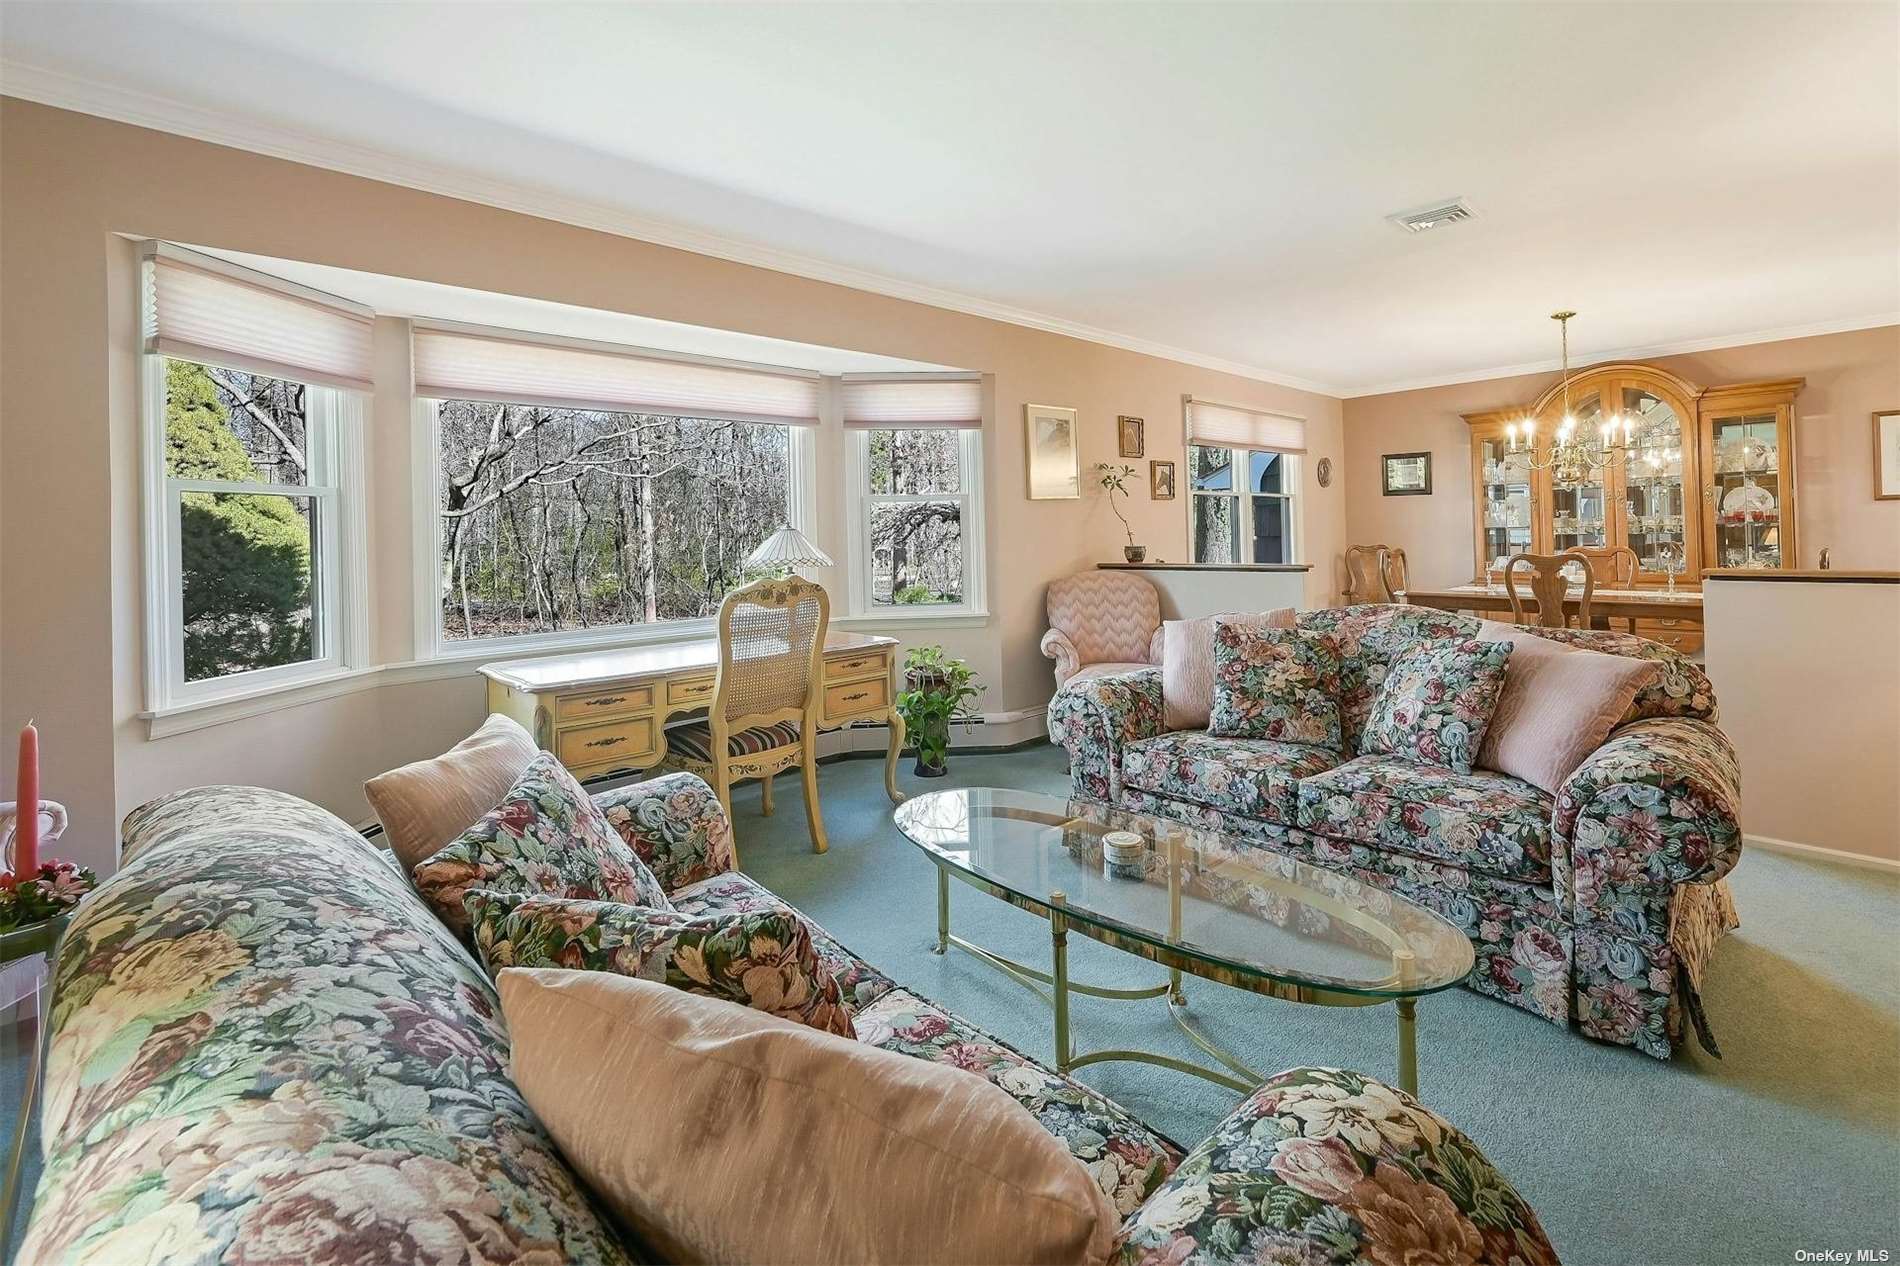 18 Circle Drive, Shoreham, New York, 11786, United States, 3 Bedrooms Bedrooms, ,3 BathroomsBathrooms,Residential,For Sale,18 Circle Drive,1499717